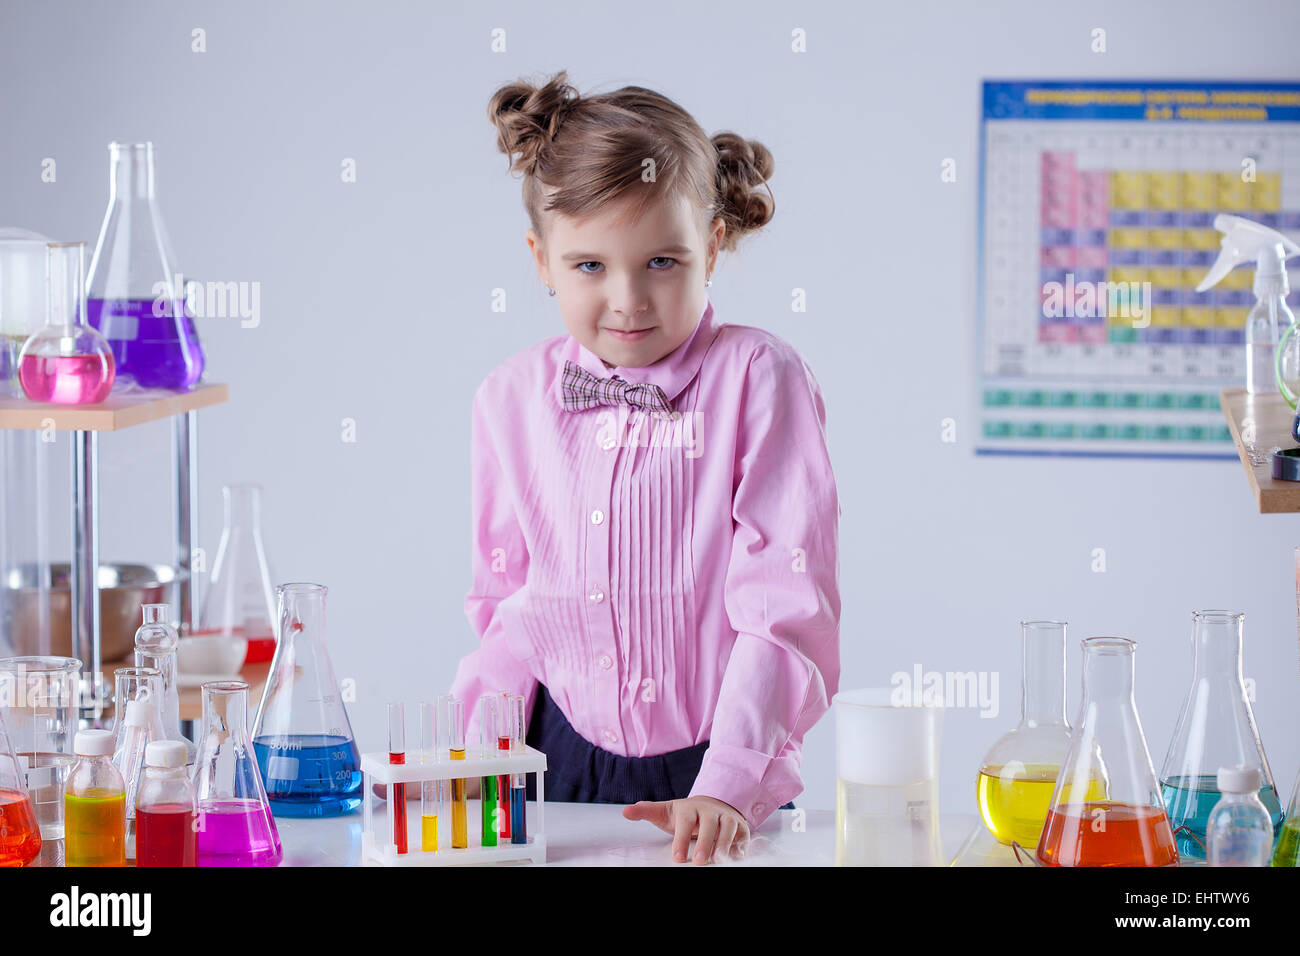 Serious little laboratorian looking at camera Stock Photo